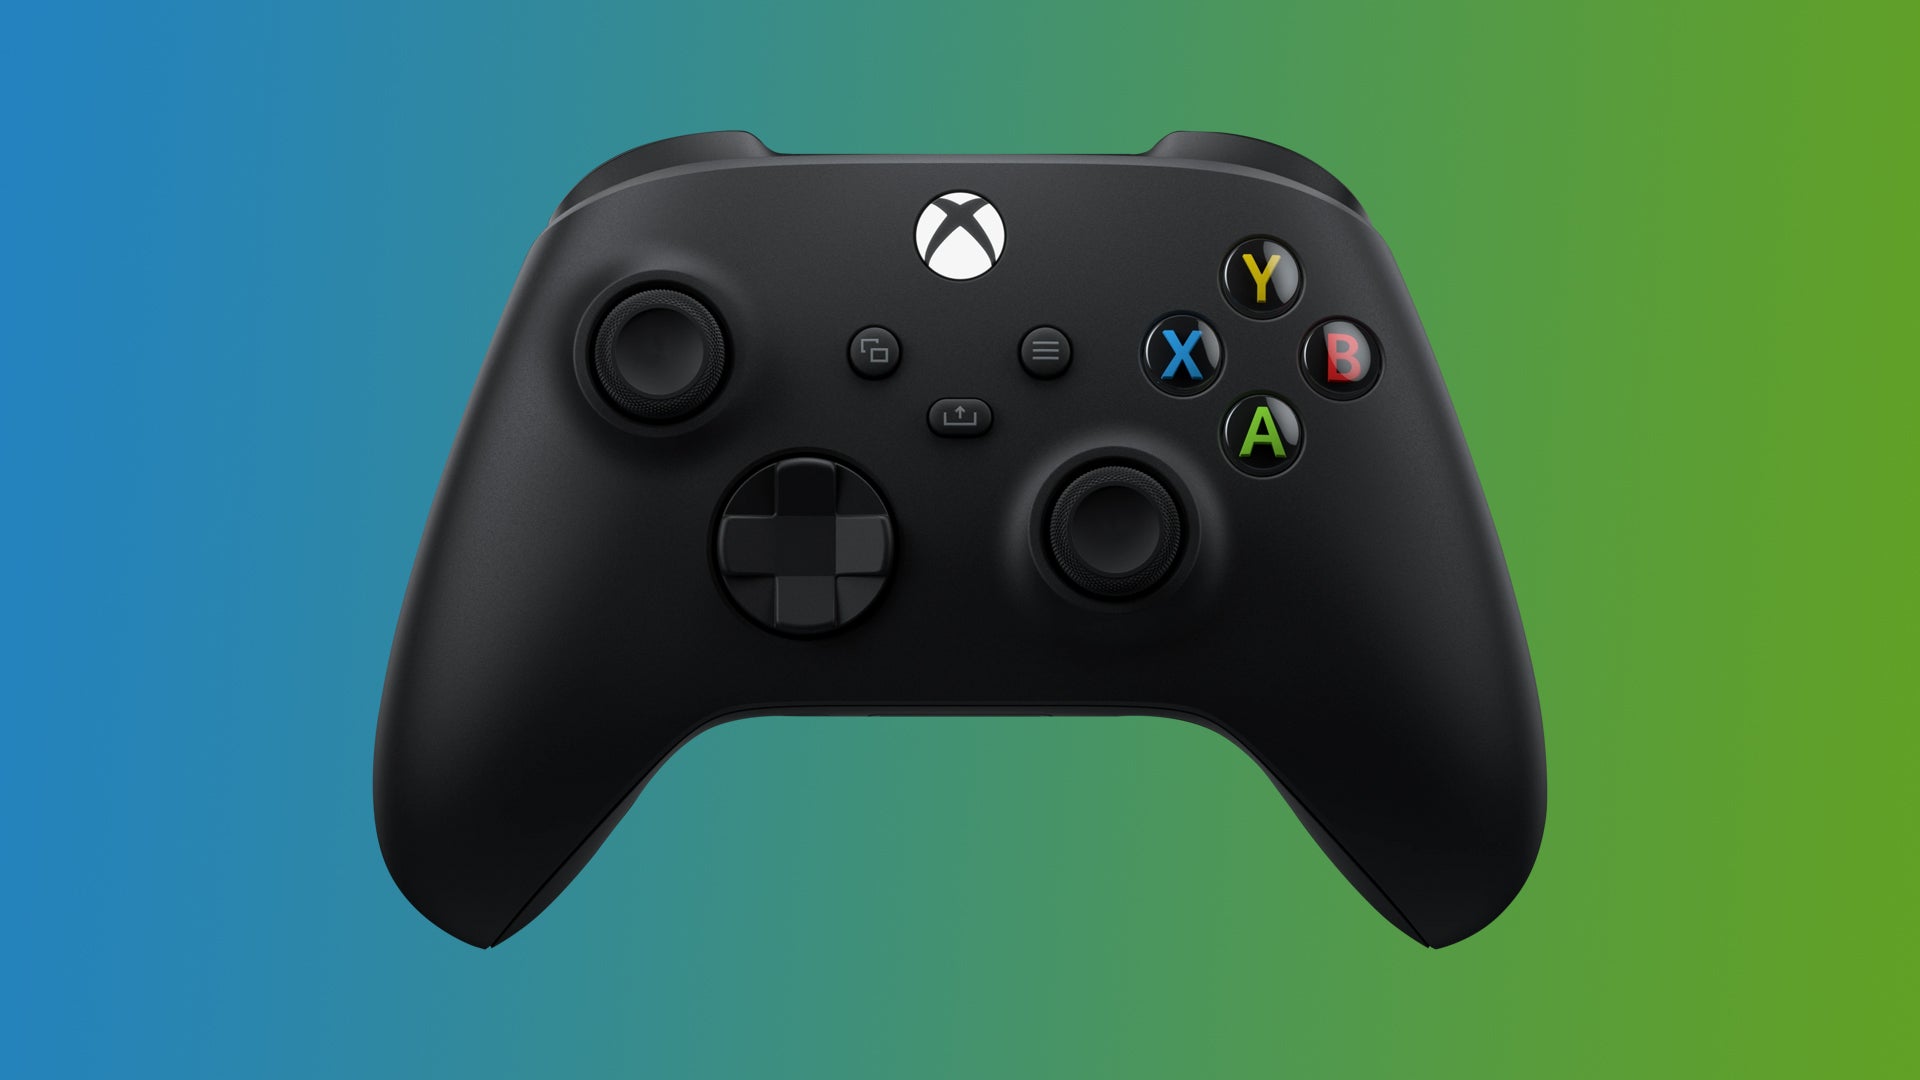 Image of an Xbox Wireless Controller on a blue to green gradient background